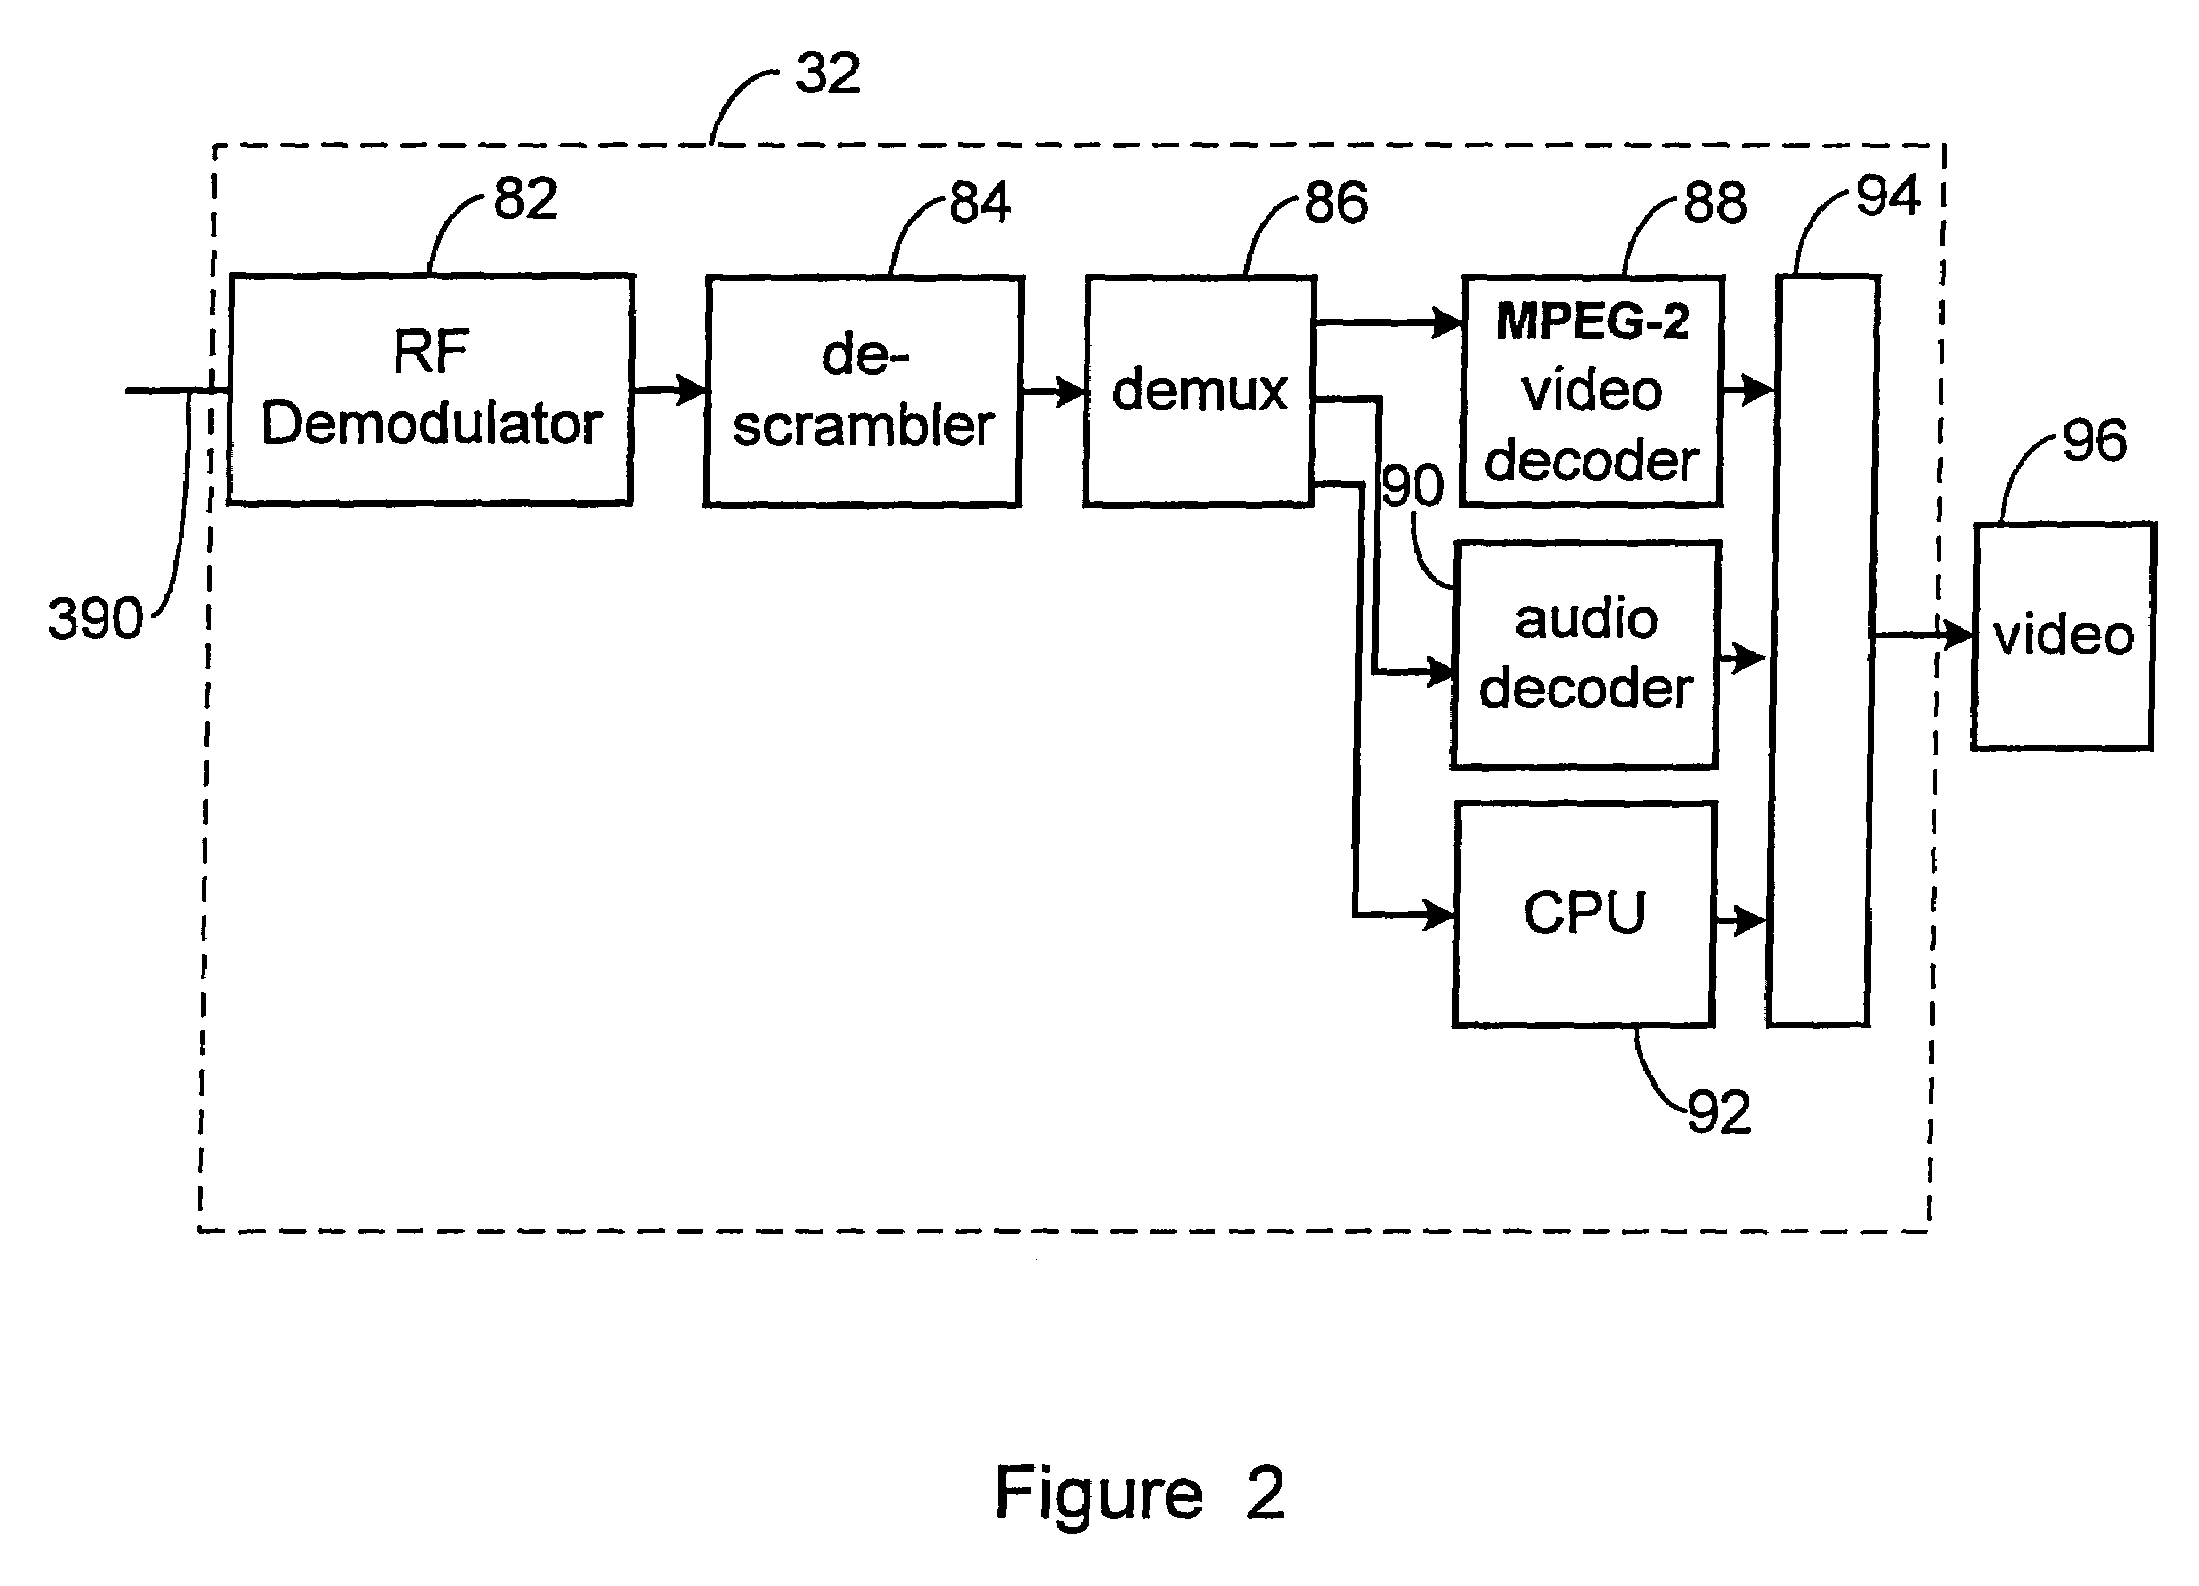 Methods and apparatus for embedding and format conversion of compressed video data